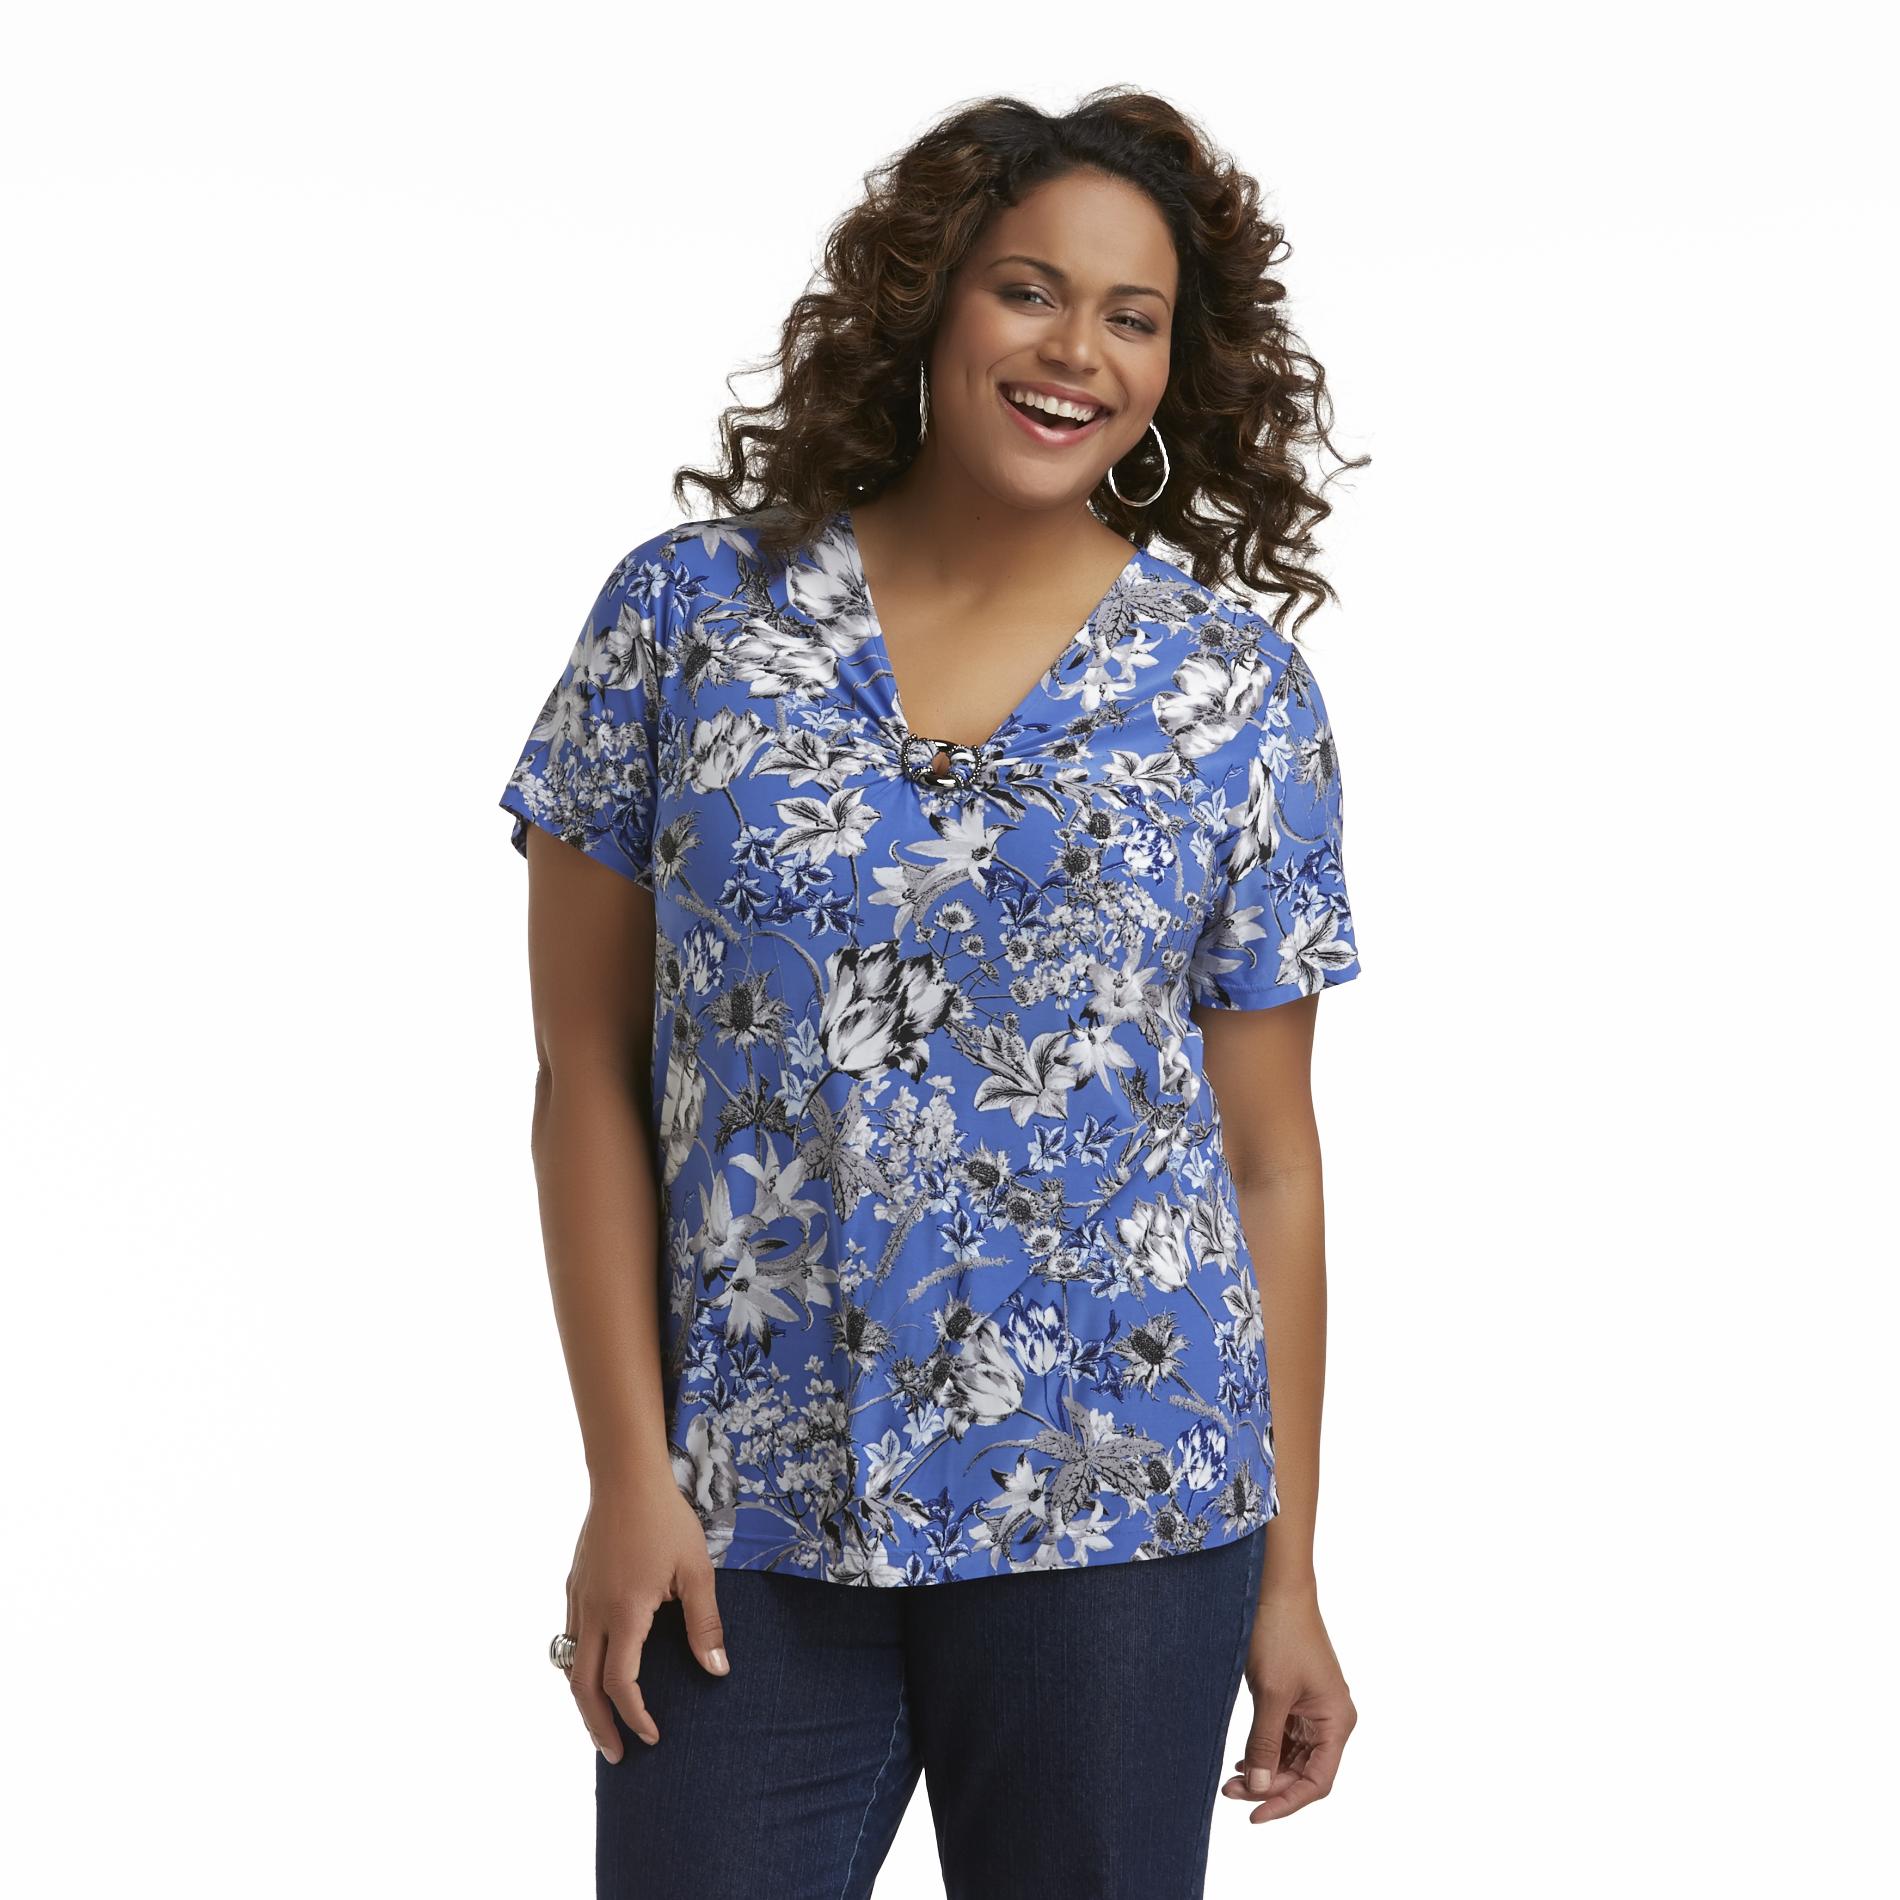 Jaclyn Smith Women's Plus V-Neck Top - Floral